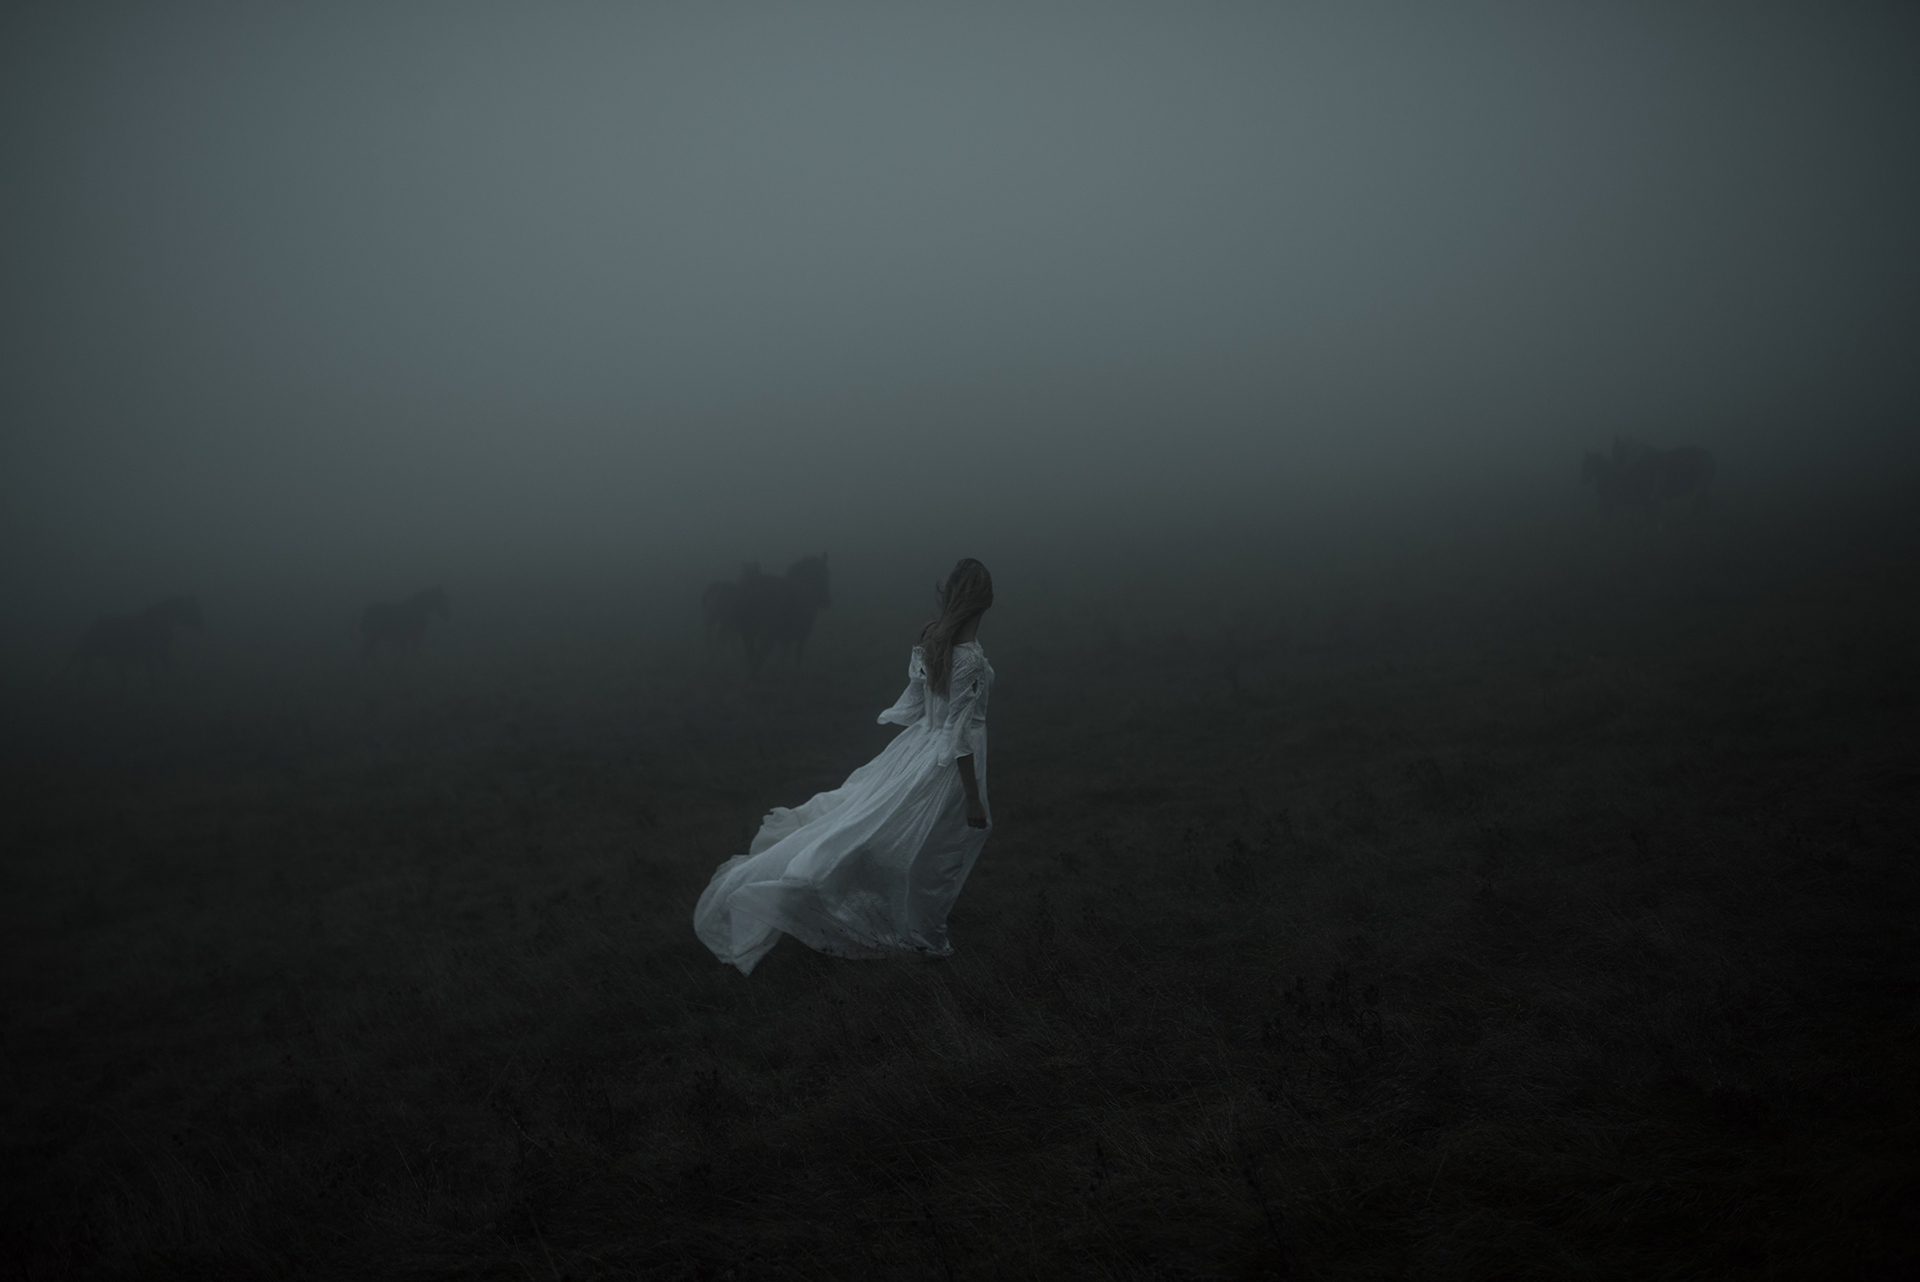 AFTERLIFE by ALESSIO ALBI